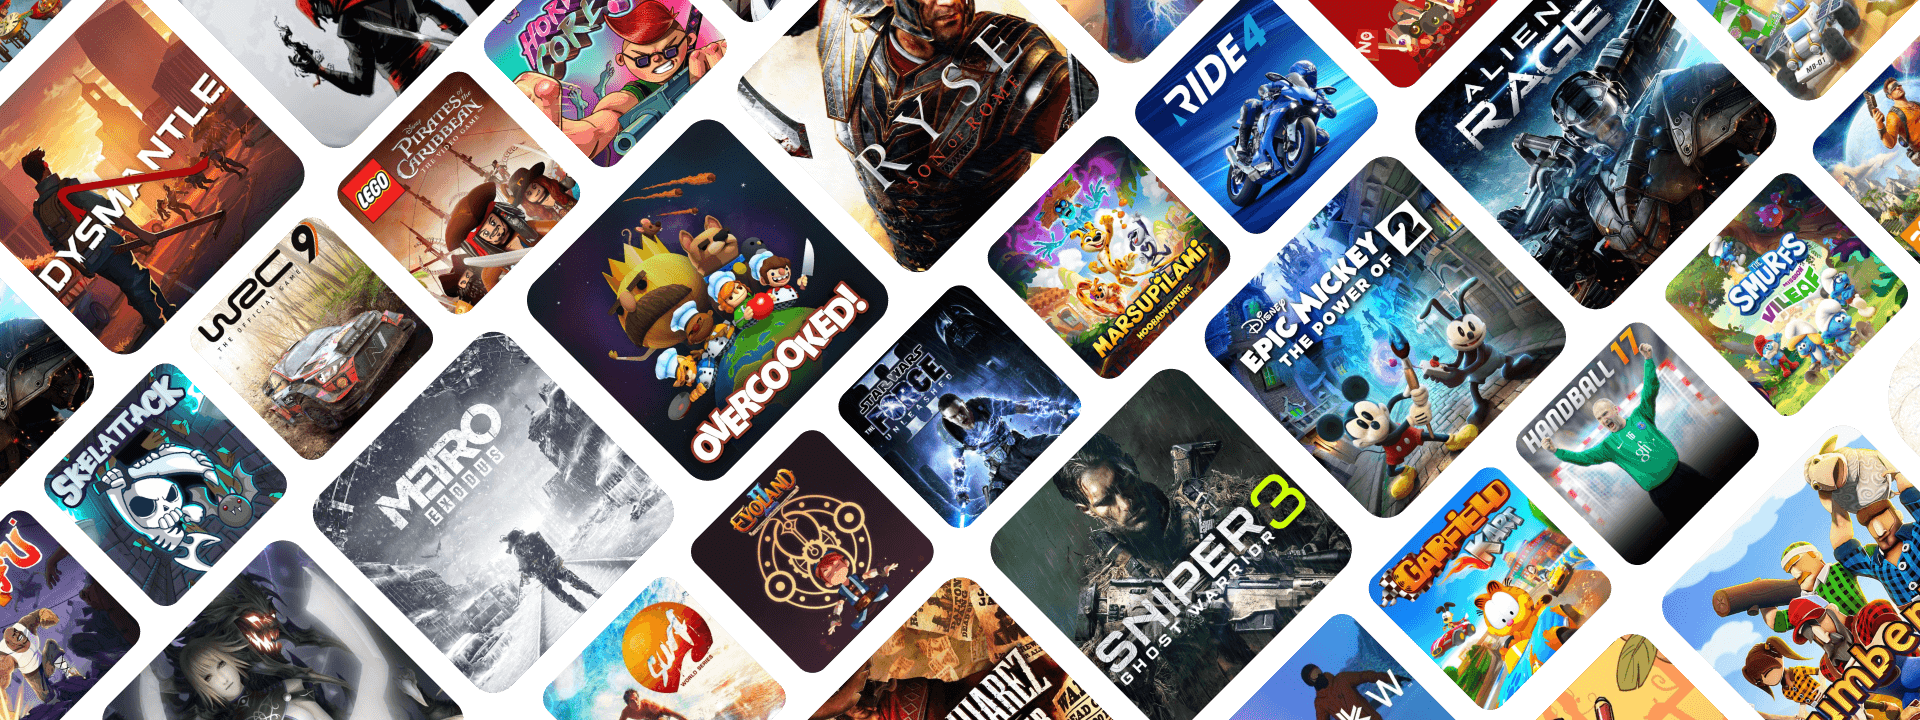 Play Over 550 Games For 30 Days On Zolaz Cloud Gaming Service For Free